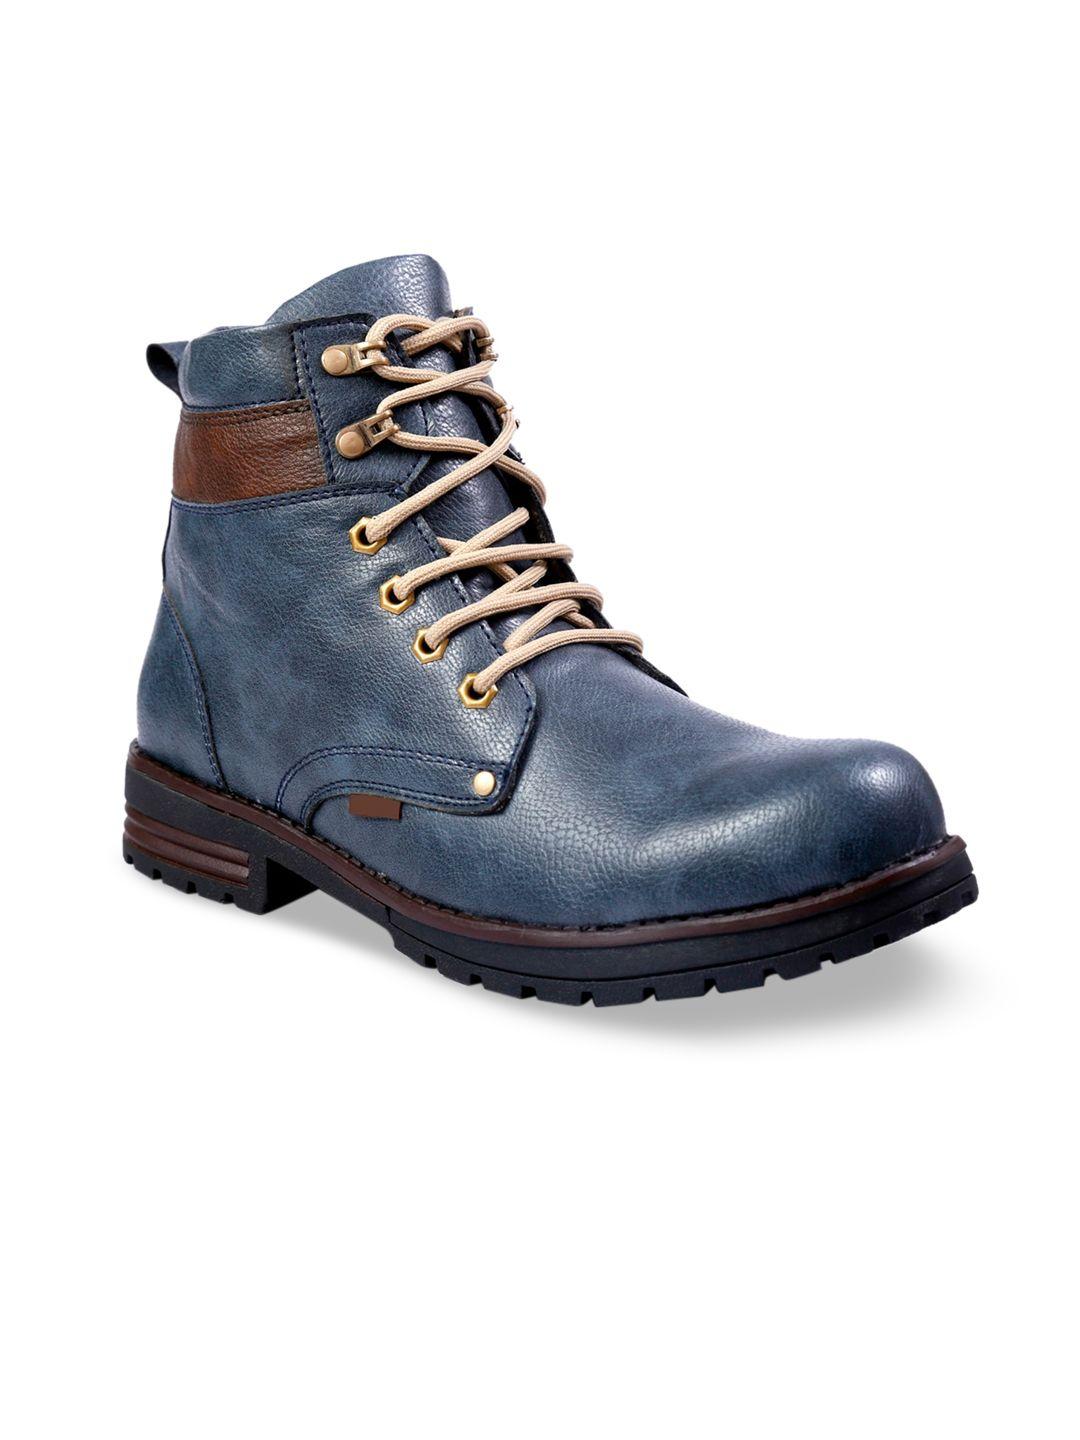 woakers men blue solid synthetic high-top flat boots